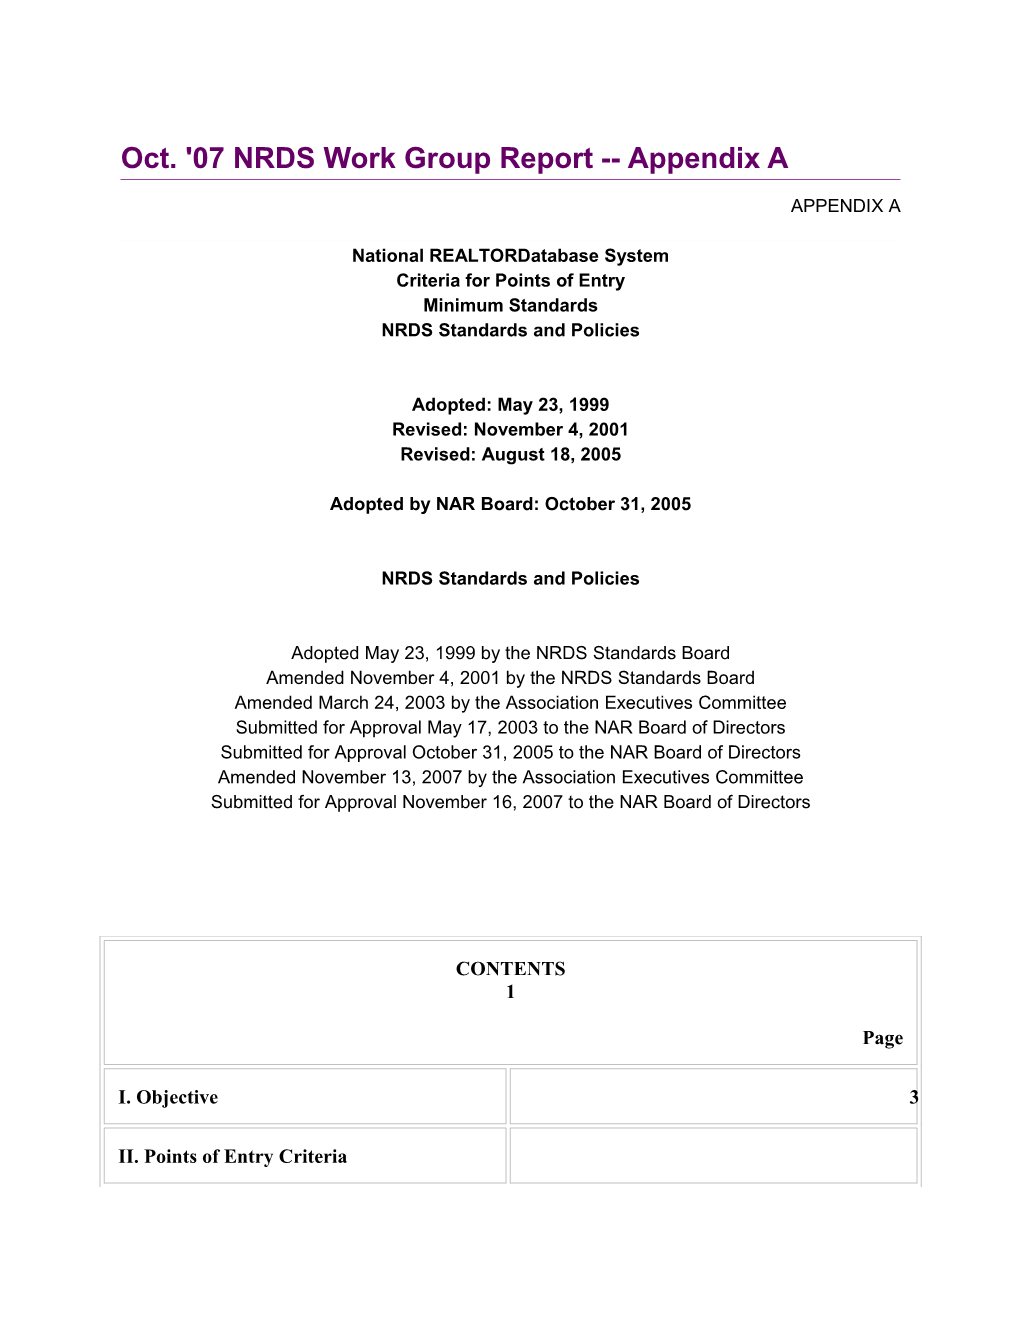 Oct. '07 NRDS Work Group Report Appendix A